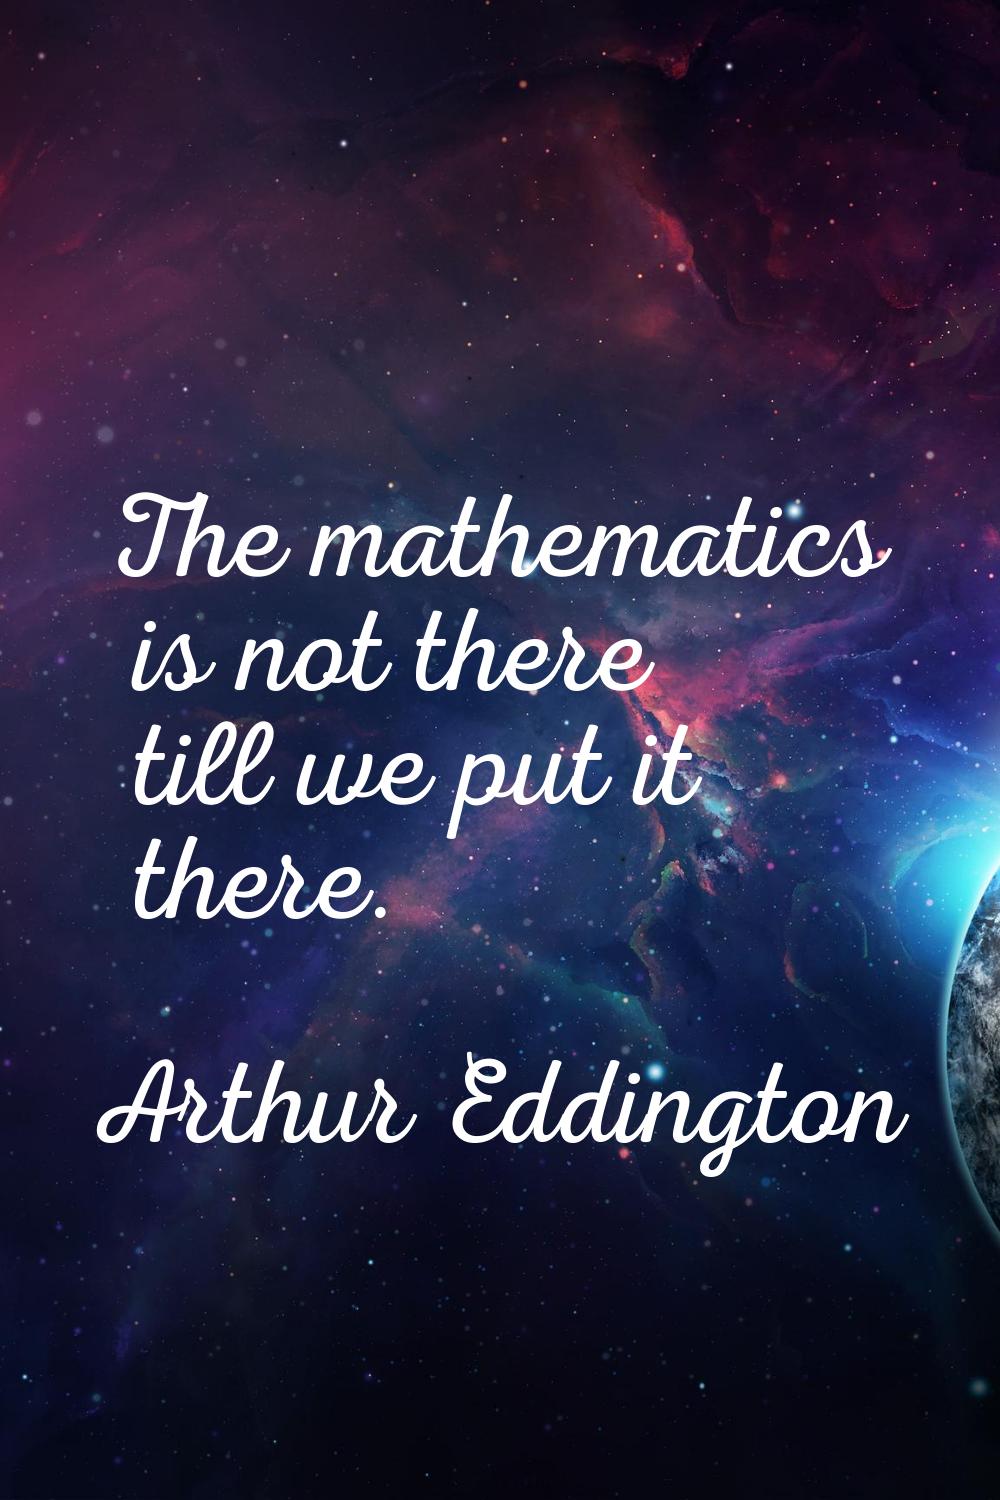 The mathematics is not there till we put it there.